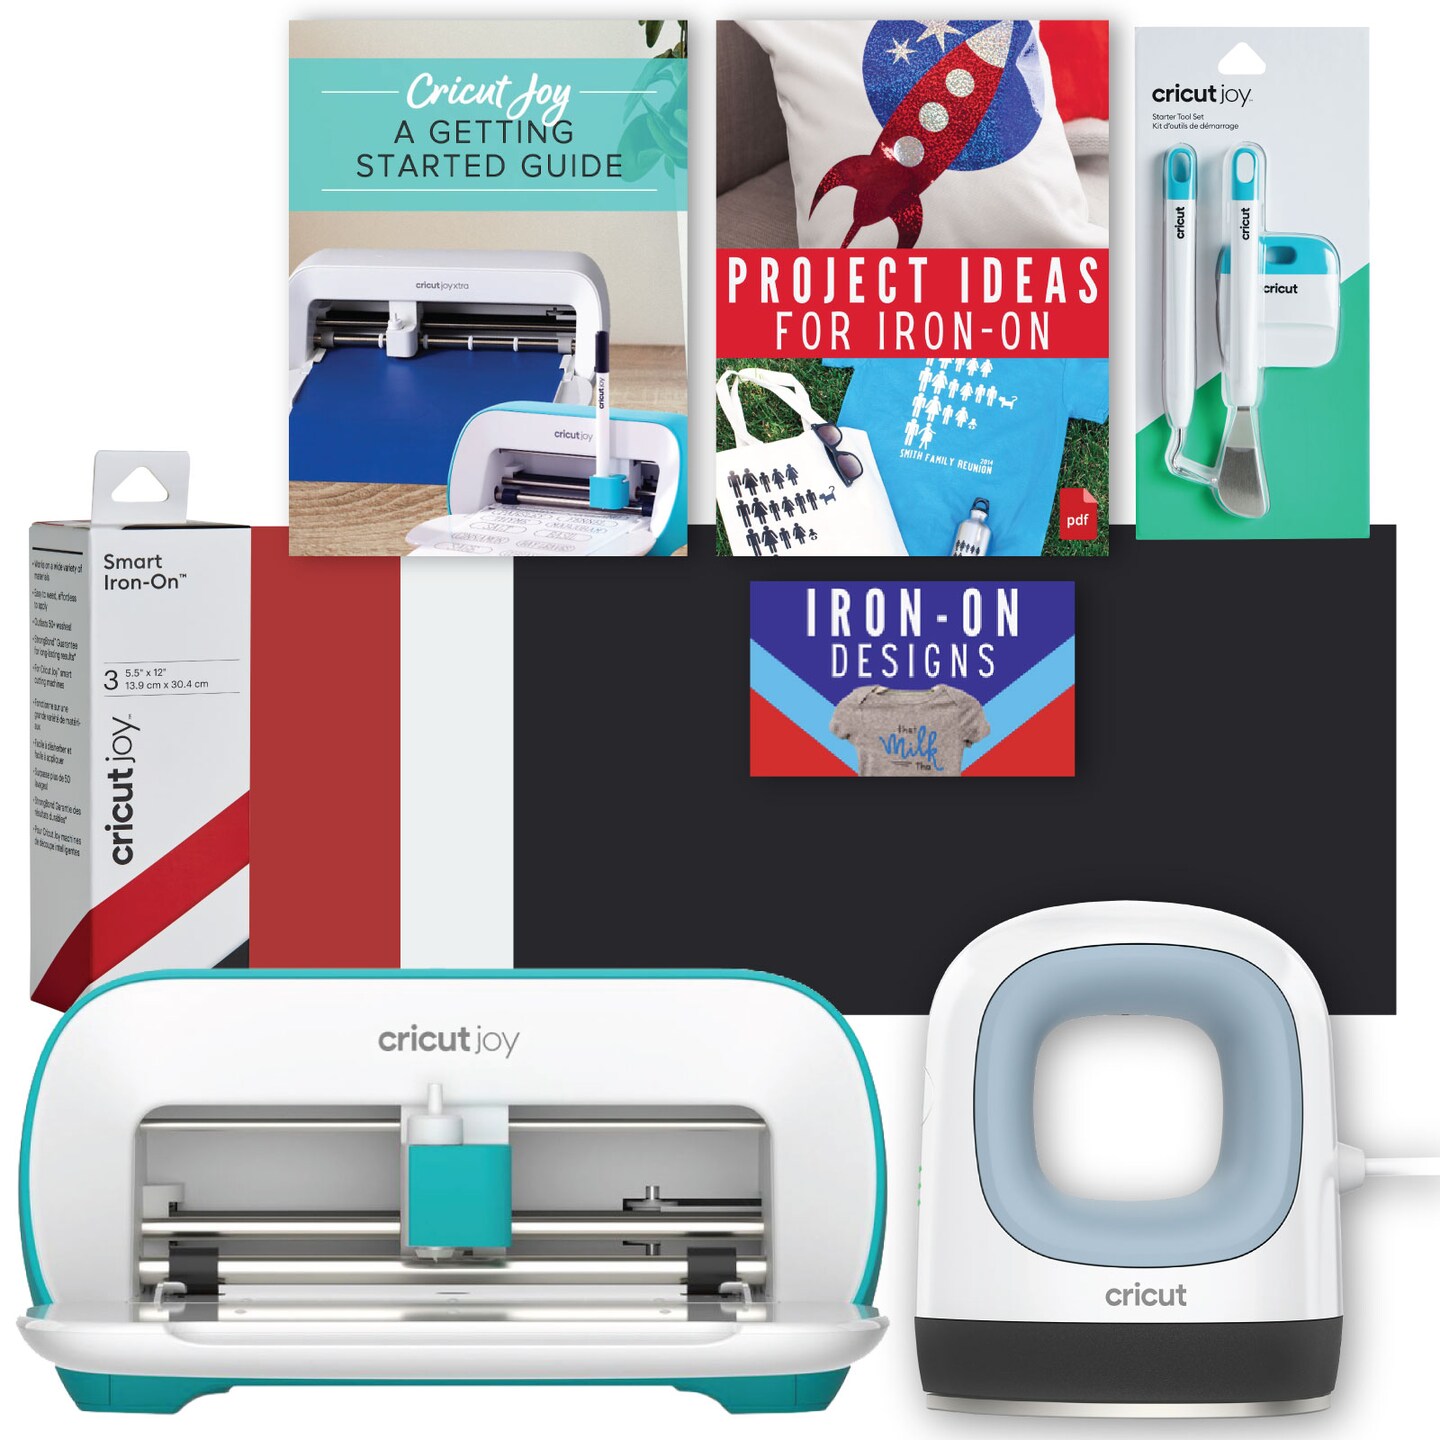 What is Cricut Joy & what can I do with it?